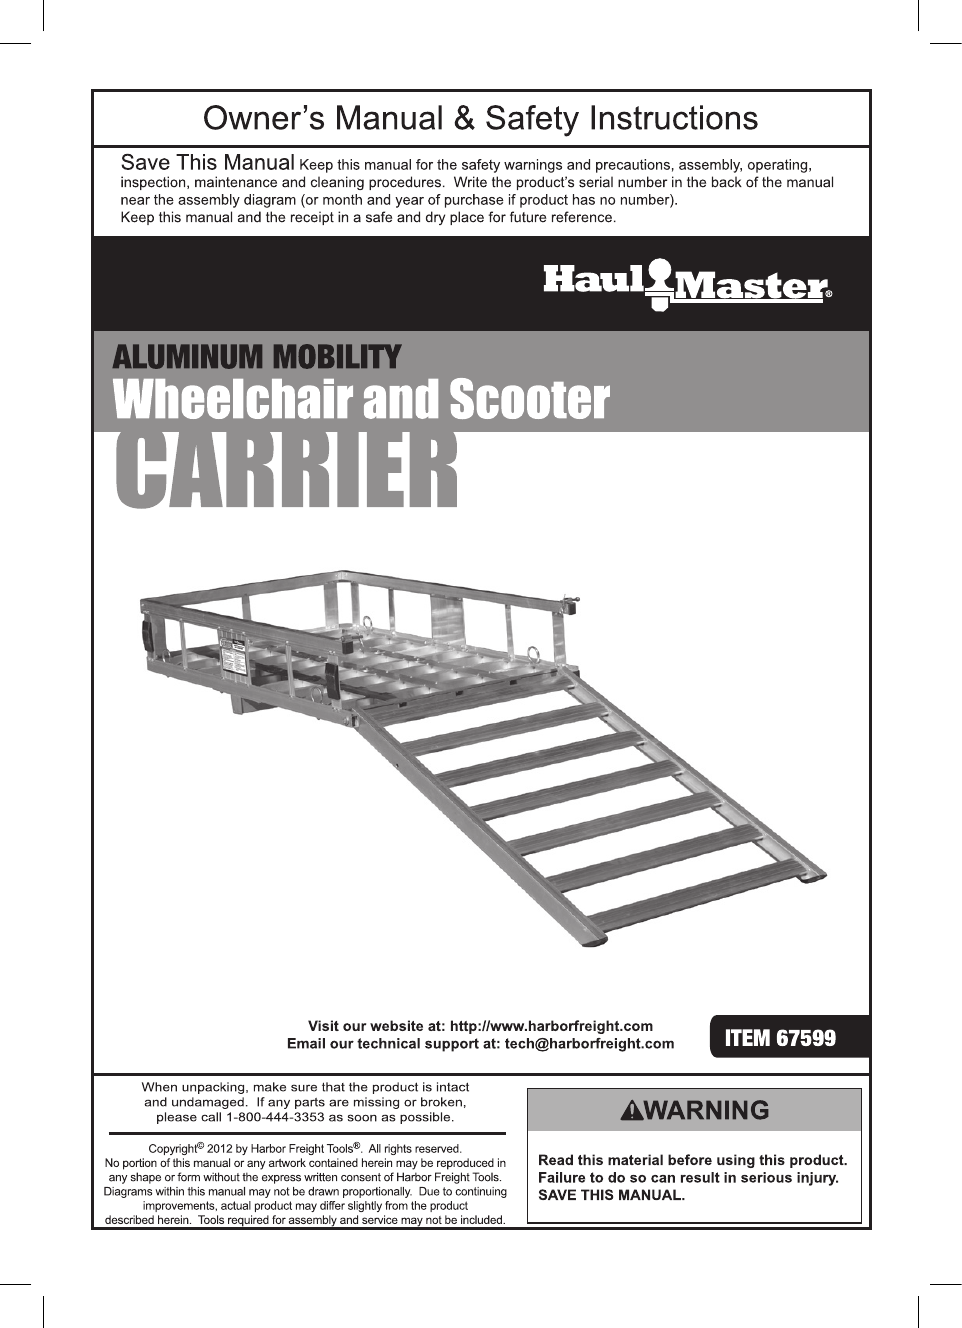 Page 1 of 12 - Harbor-Freight Harbor-Freight-500-Lb-Capacity-Aluminum-Mobility-Wheelchair-And-Scooter-Carrier-Product-Manual-  Harbor-freight-500-lb-capacity-aluminum-mobility-wheelchair-and-scooter-carrier-product-manual